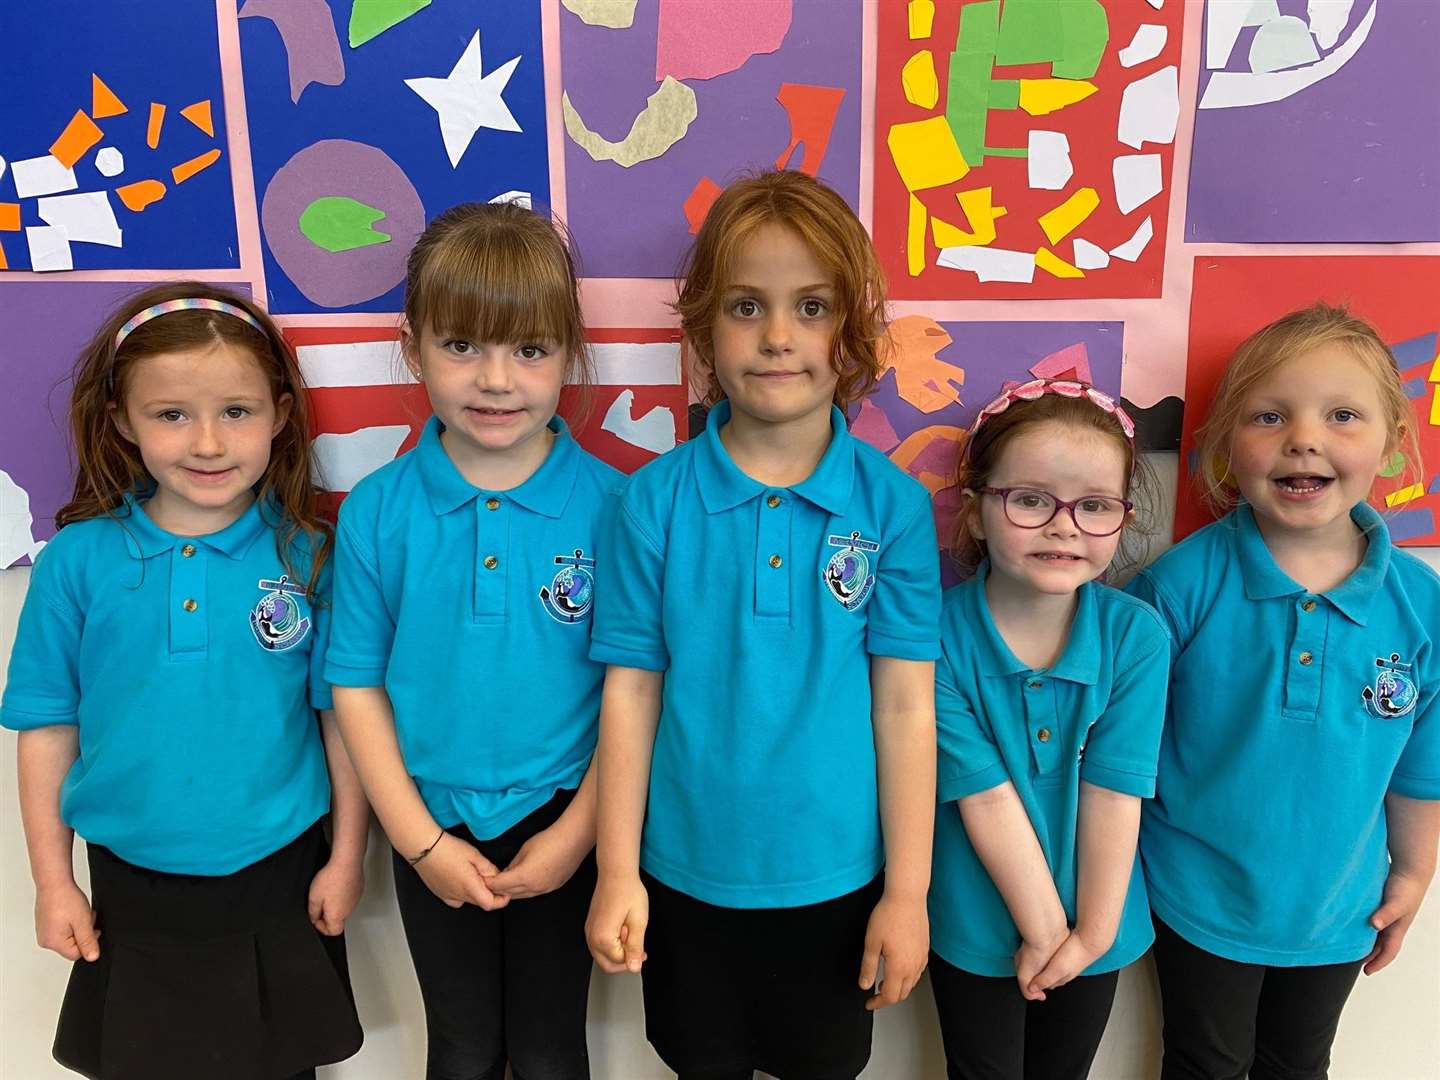 Elizabeth Sweeting, Leah Macleod, Isabelle Aldridge, Grace Mackay and Keeva Kerr are the new Primary 1s at Melvich Primary School.